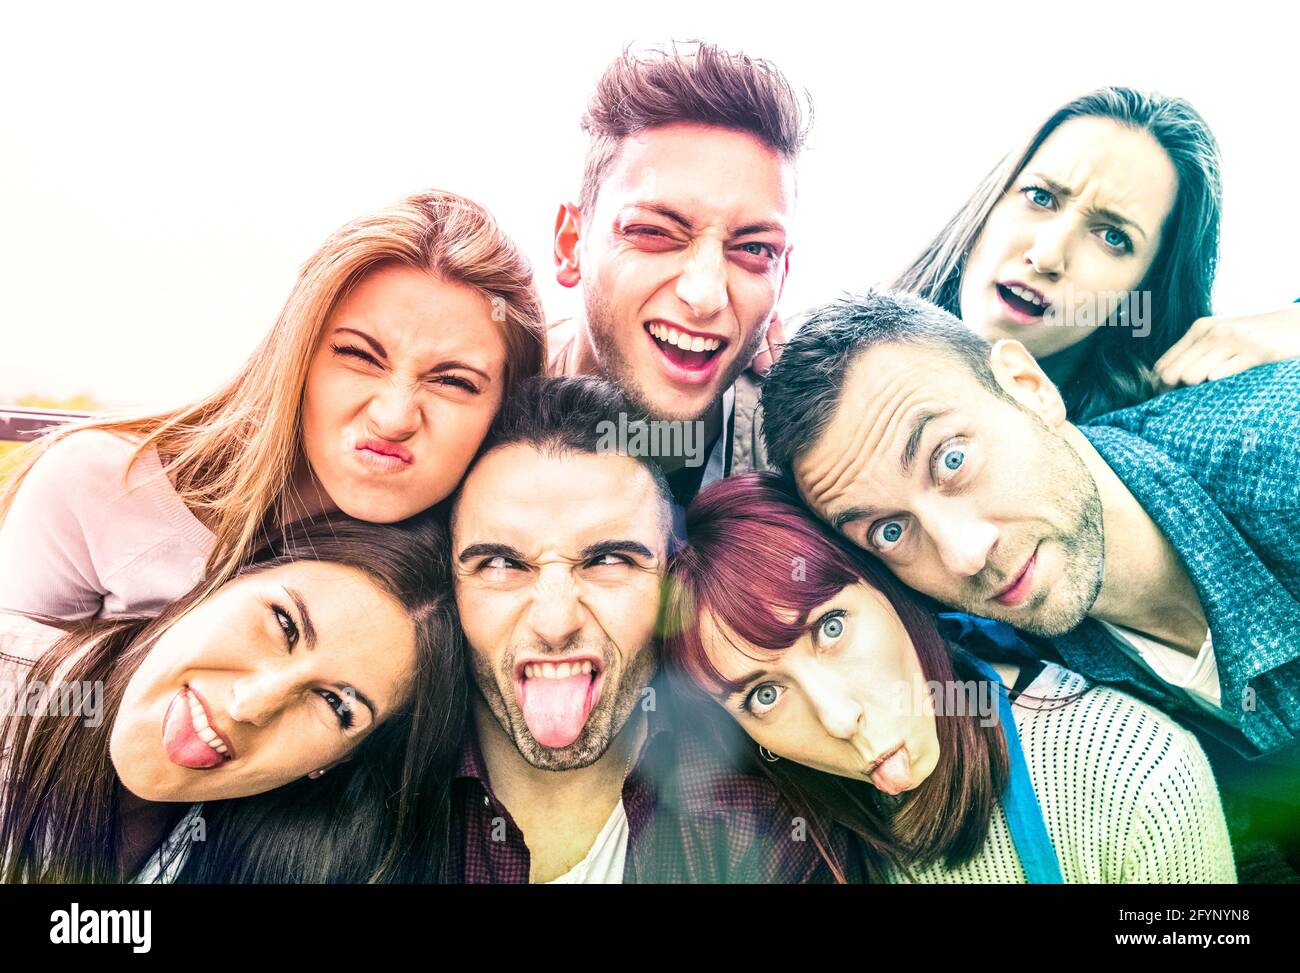 Multicultural millenial friends taking selfie with funny faces - Happy youth friendship concept with millennial young trendy people having fun Stock Photo